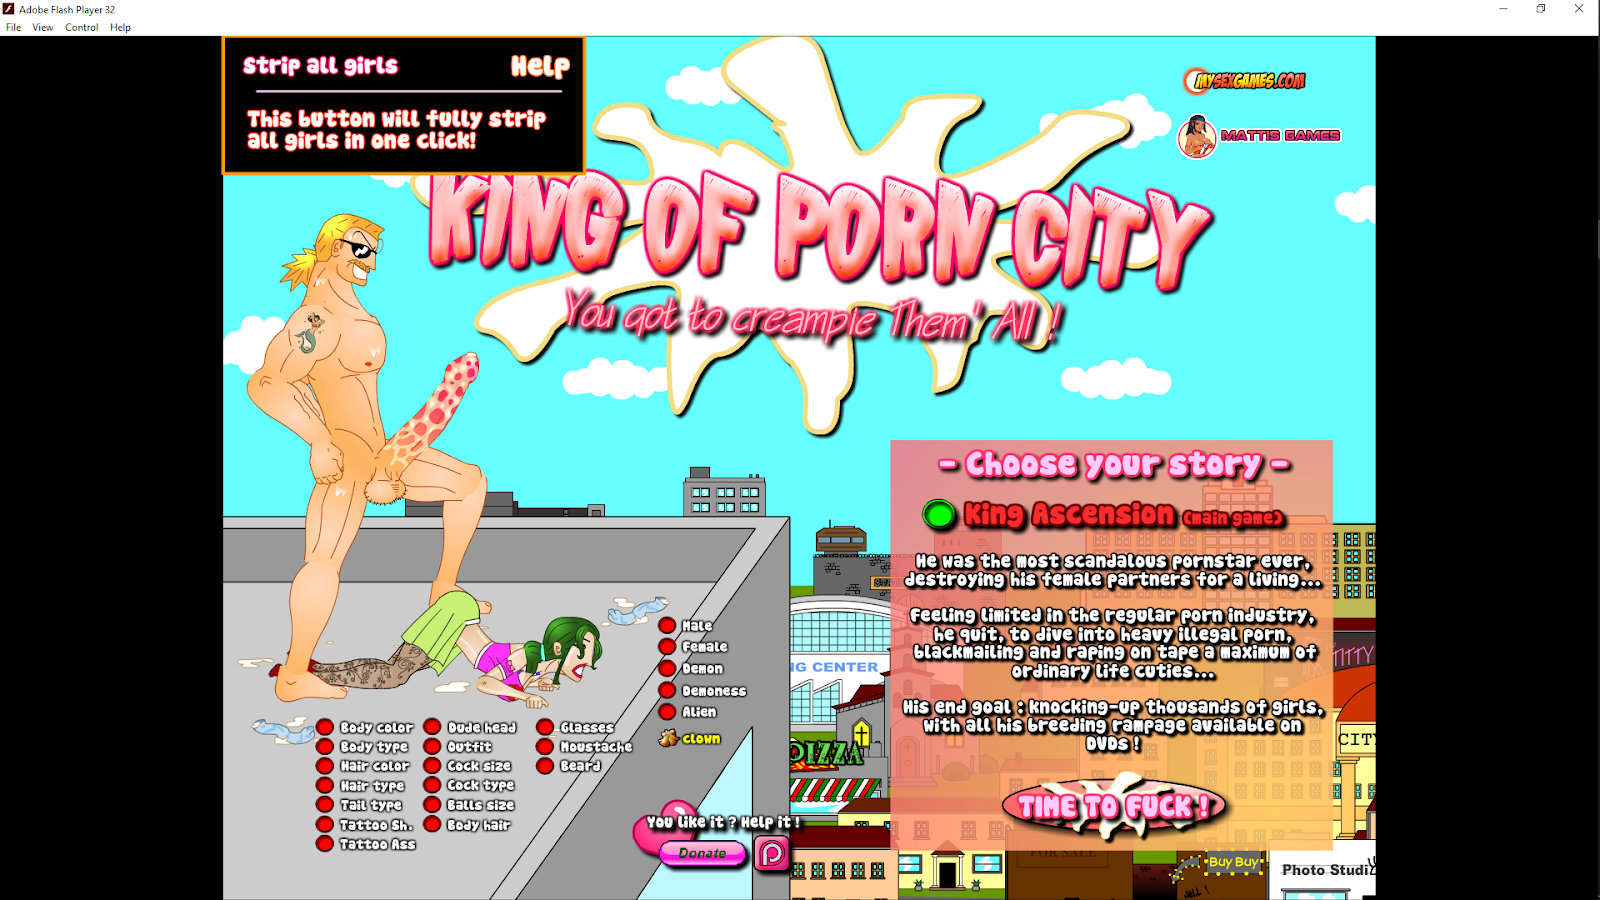 The king of porn city